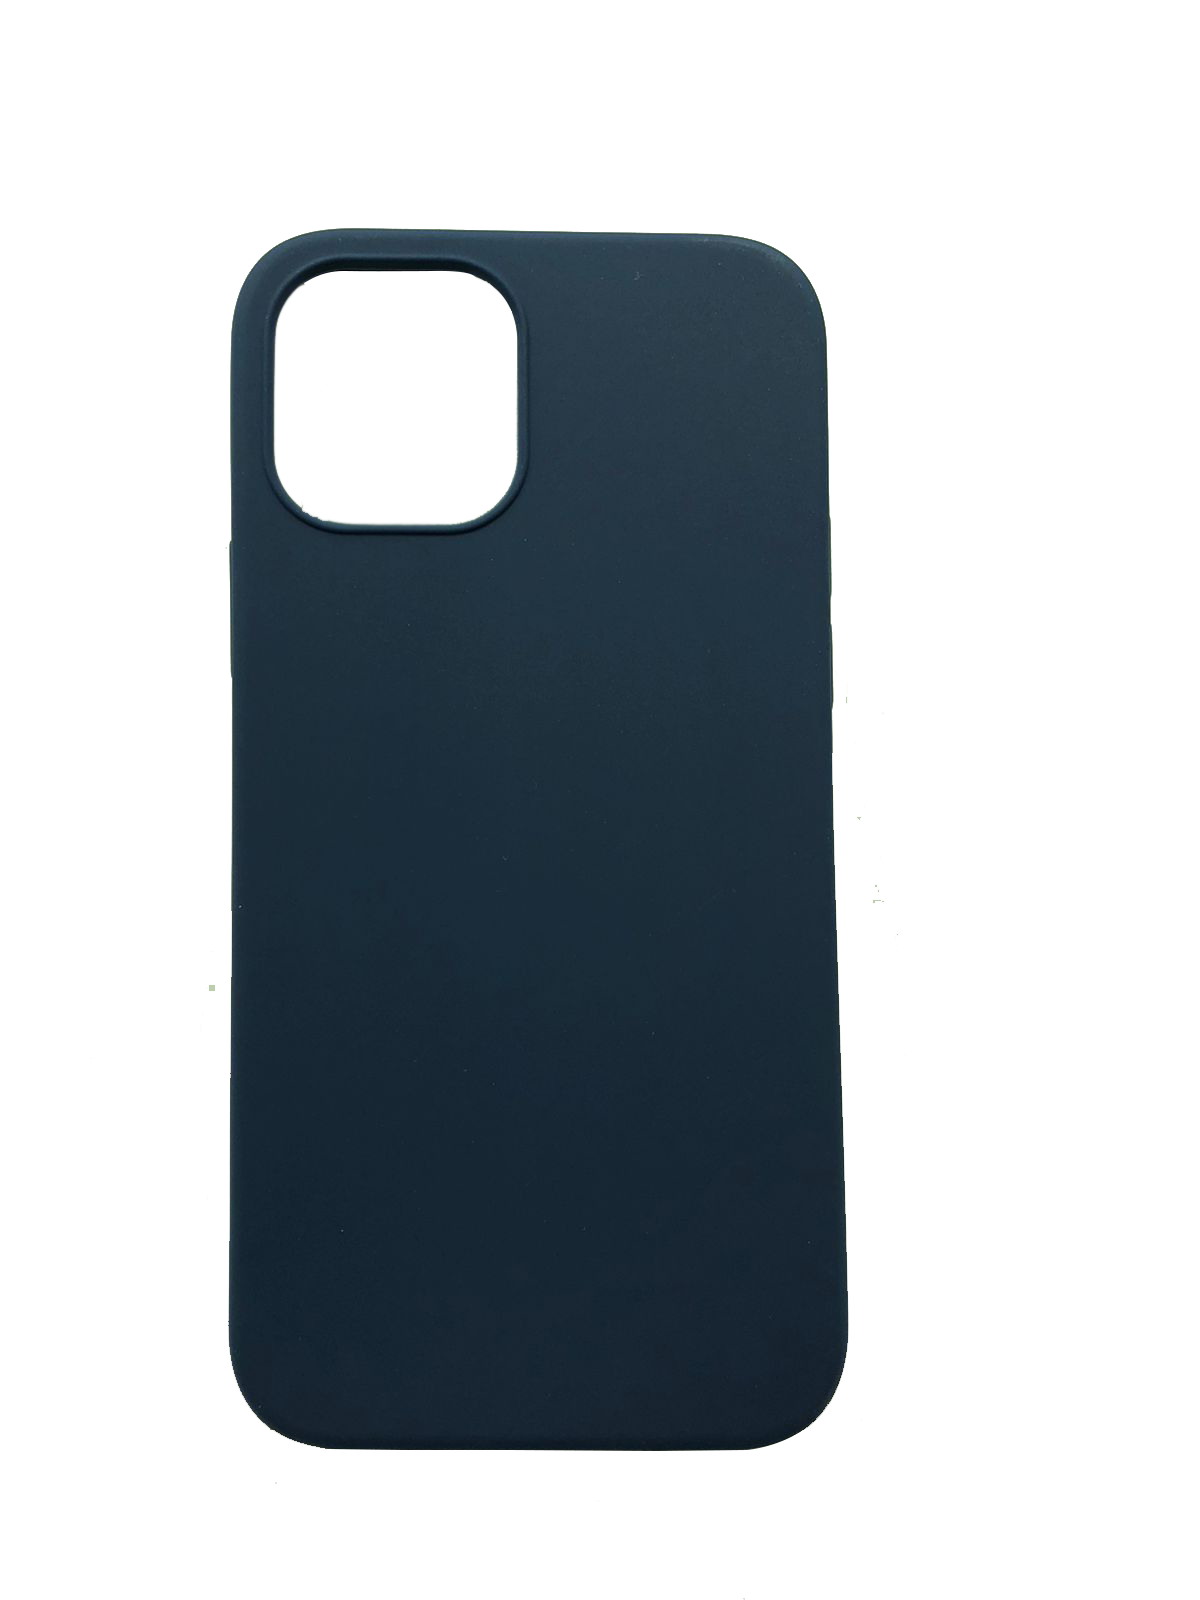 Silicone Case iPHONE 12 PRO  NAVY BLUE